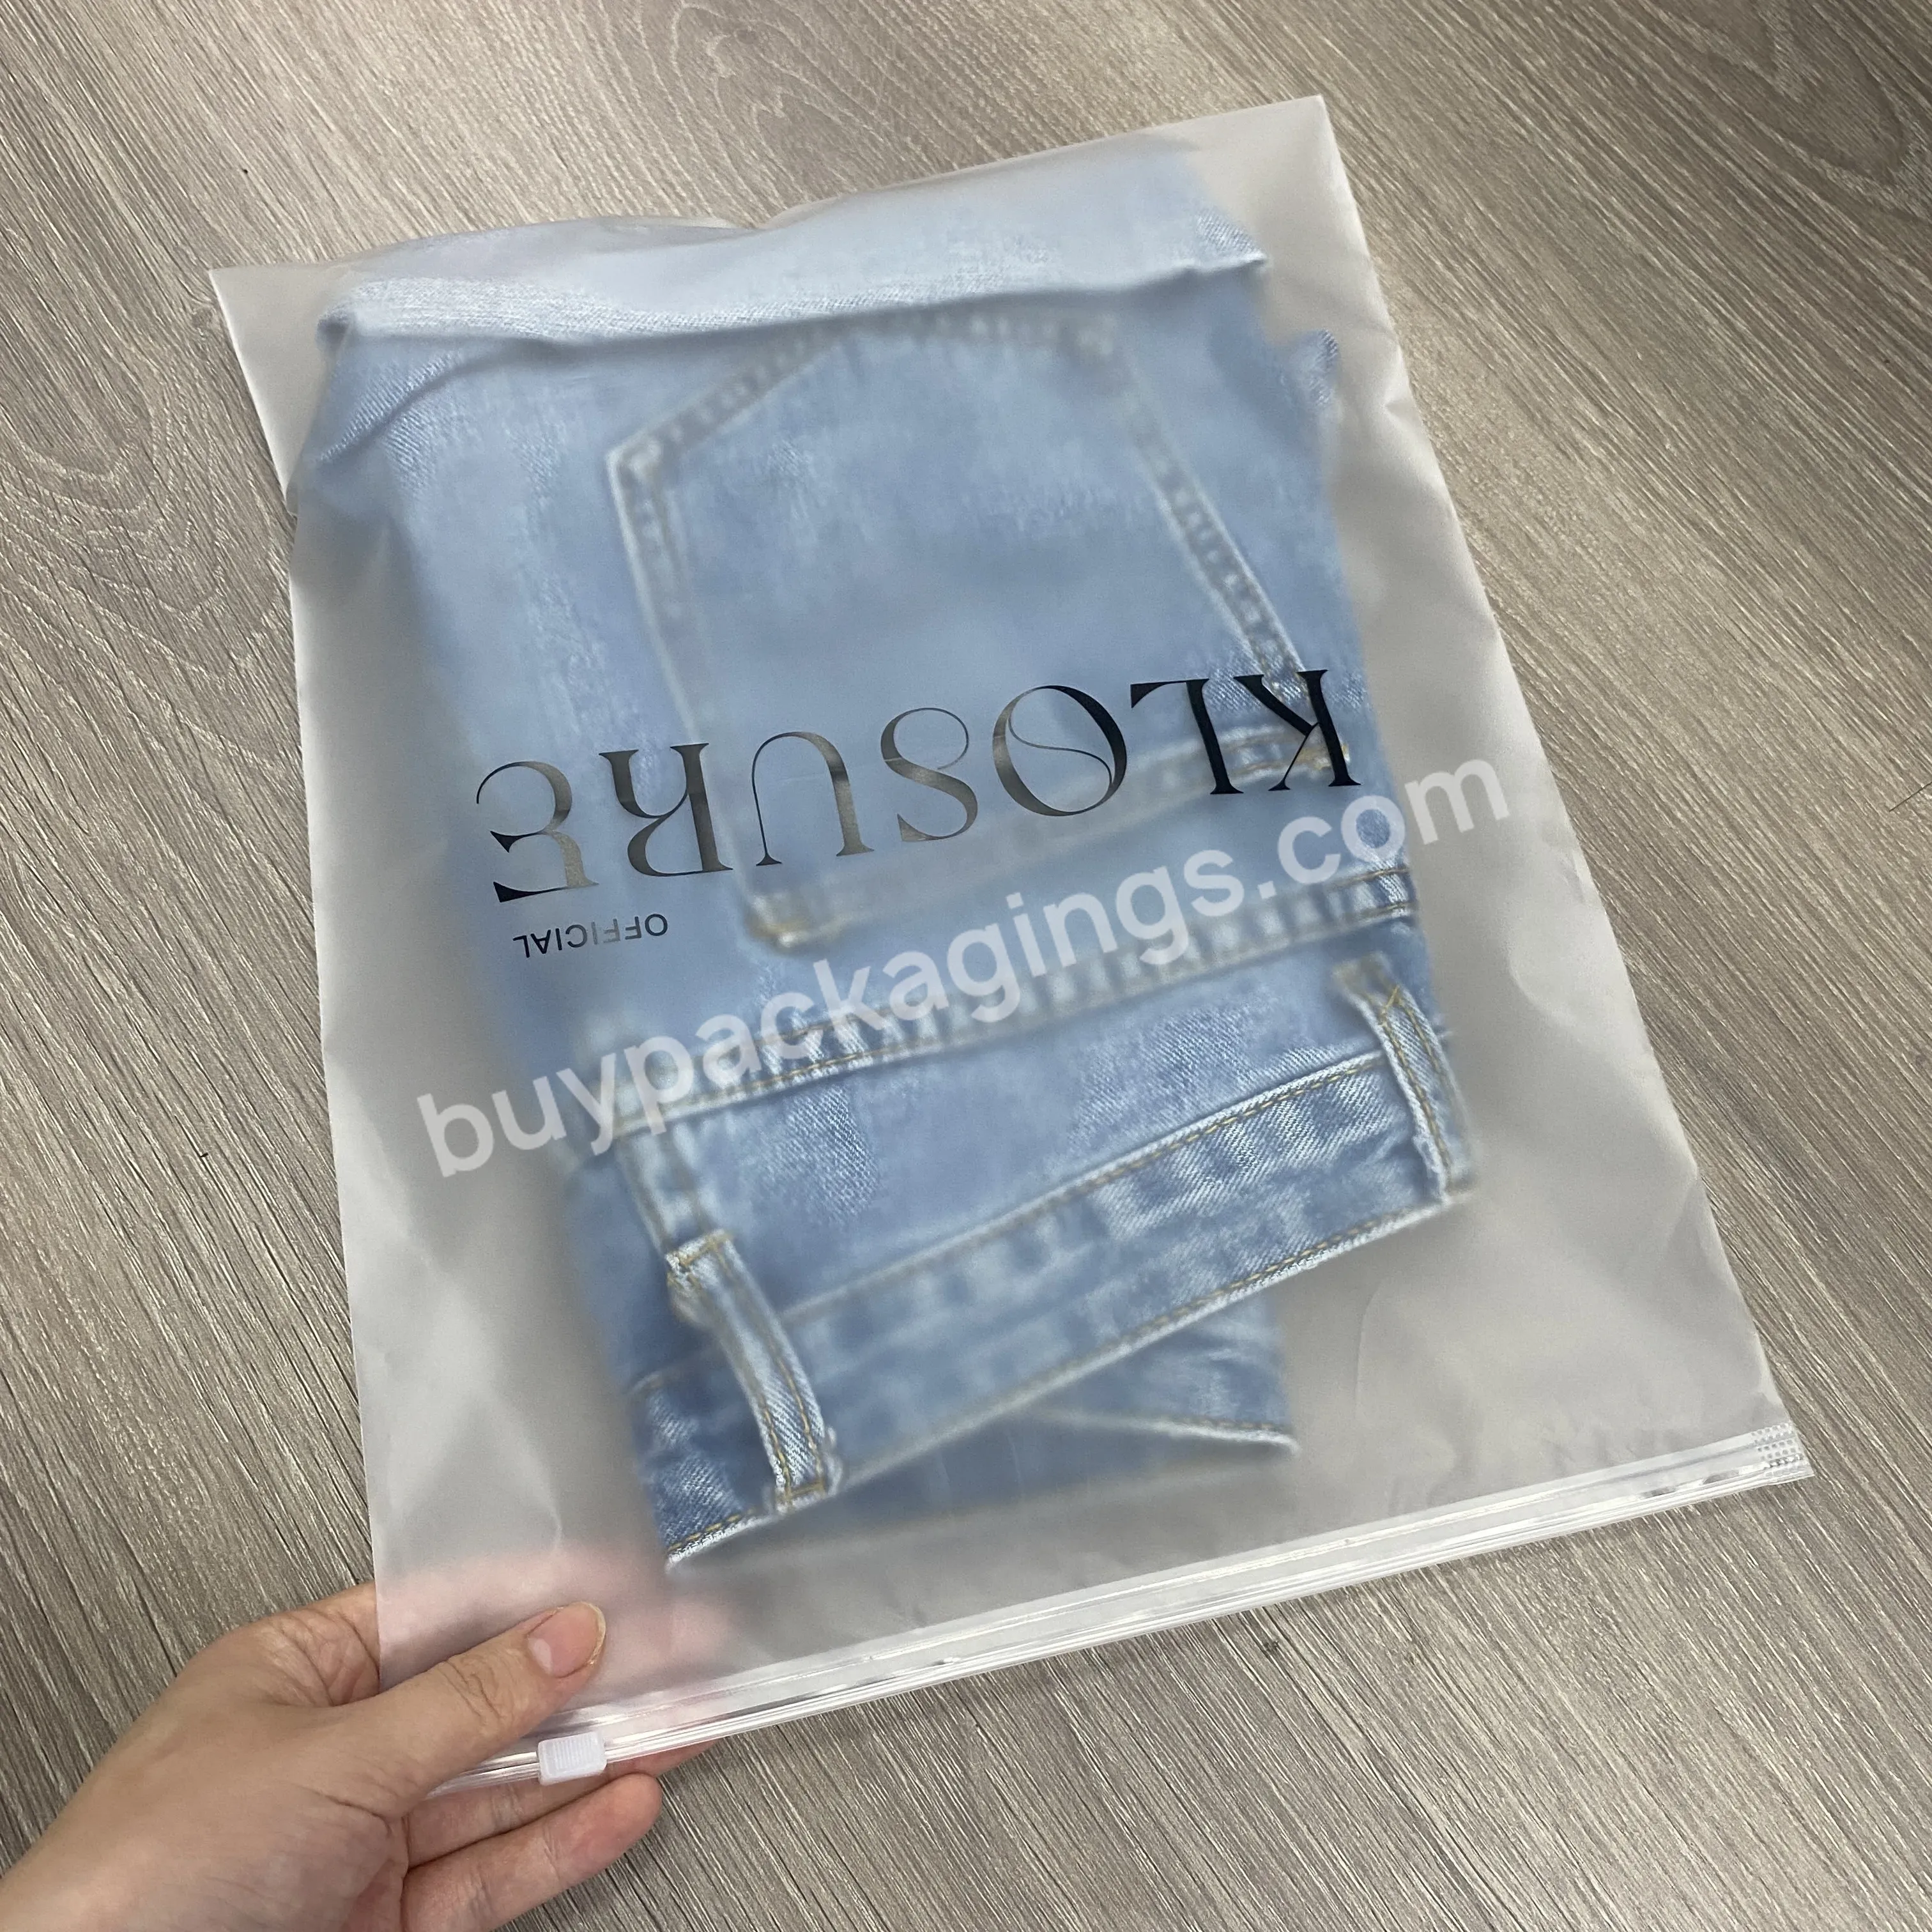 Factory Wholesale Small Quantity Recyclable Frosted Plastic Garment Zipper Bags With Your Design For Clothing Swimwear Hat - Buy Custom Size Logo Print,Colorful Brand Frosted Zipper Bag,Plastic Packaging For Travel.